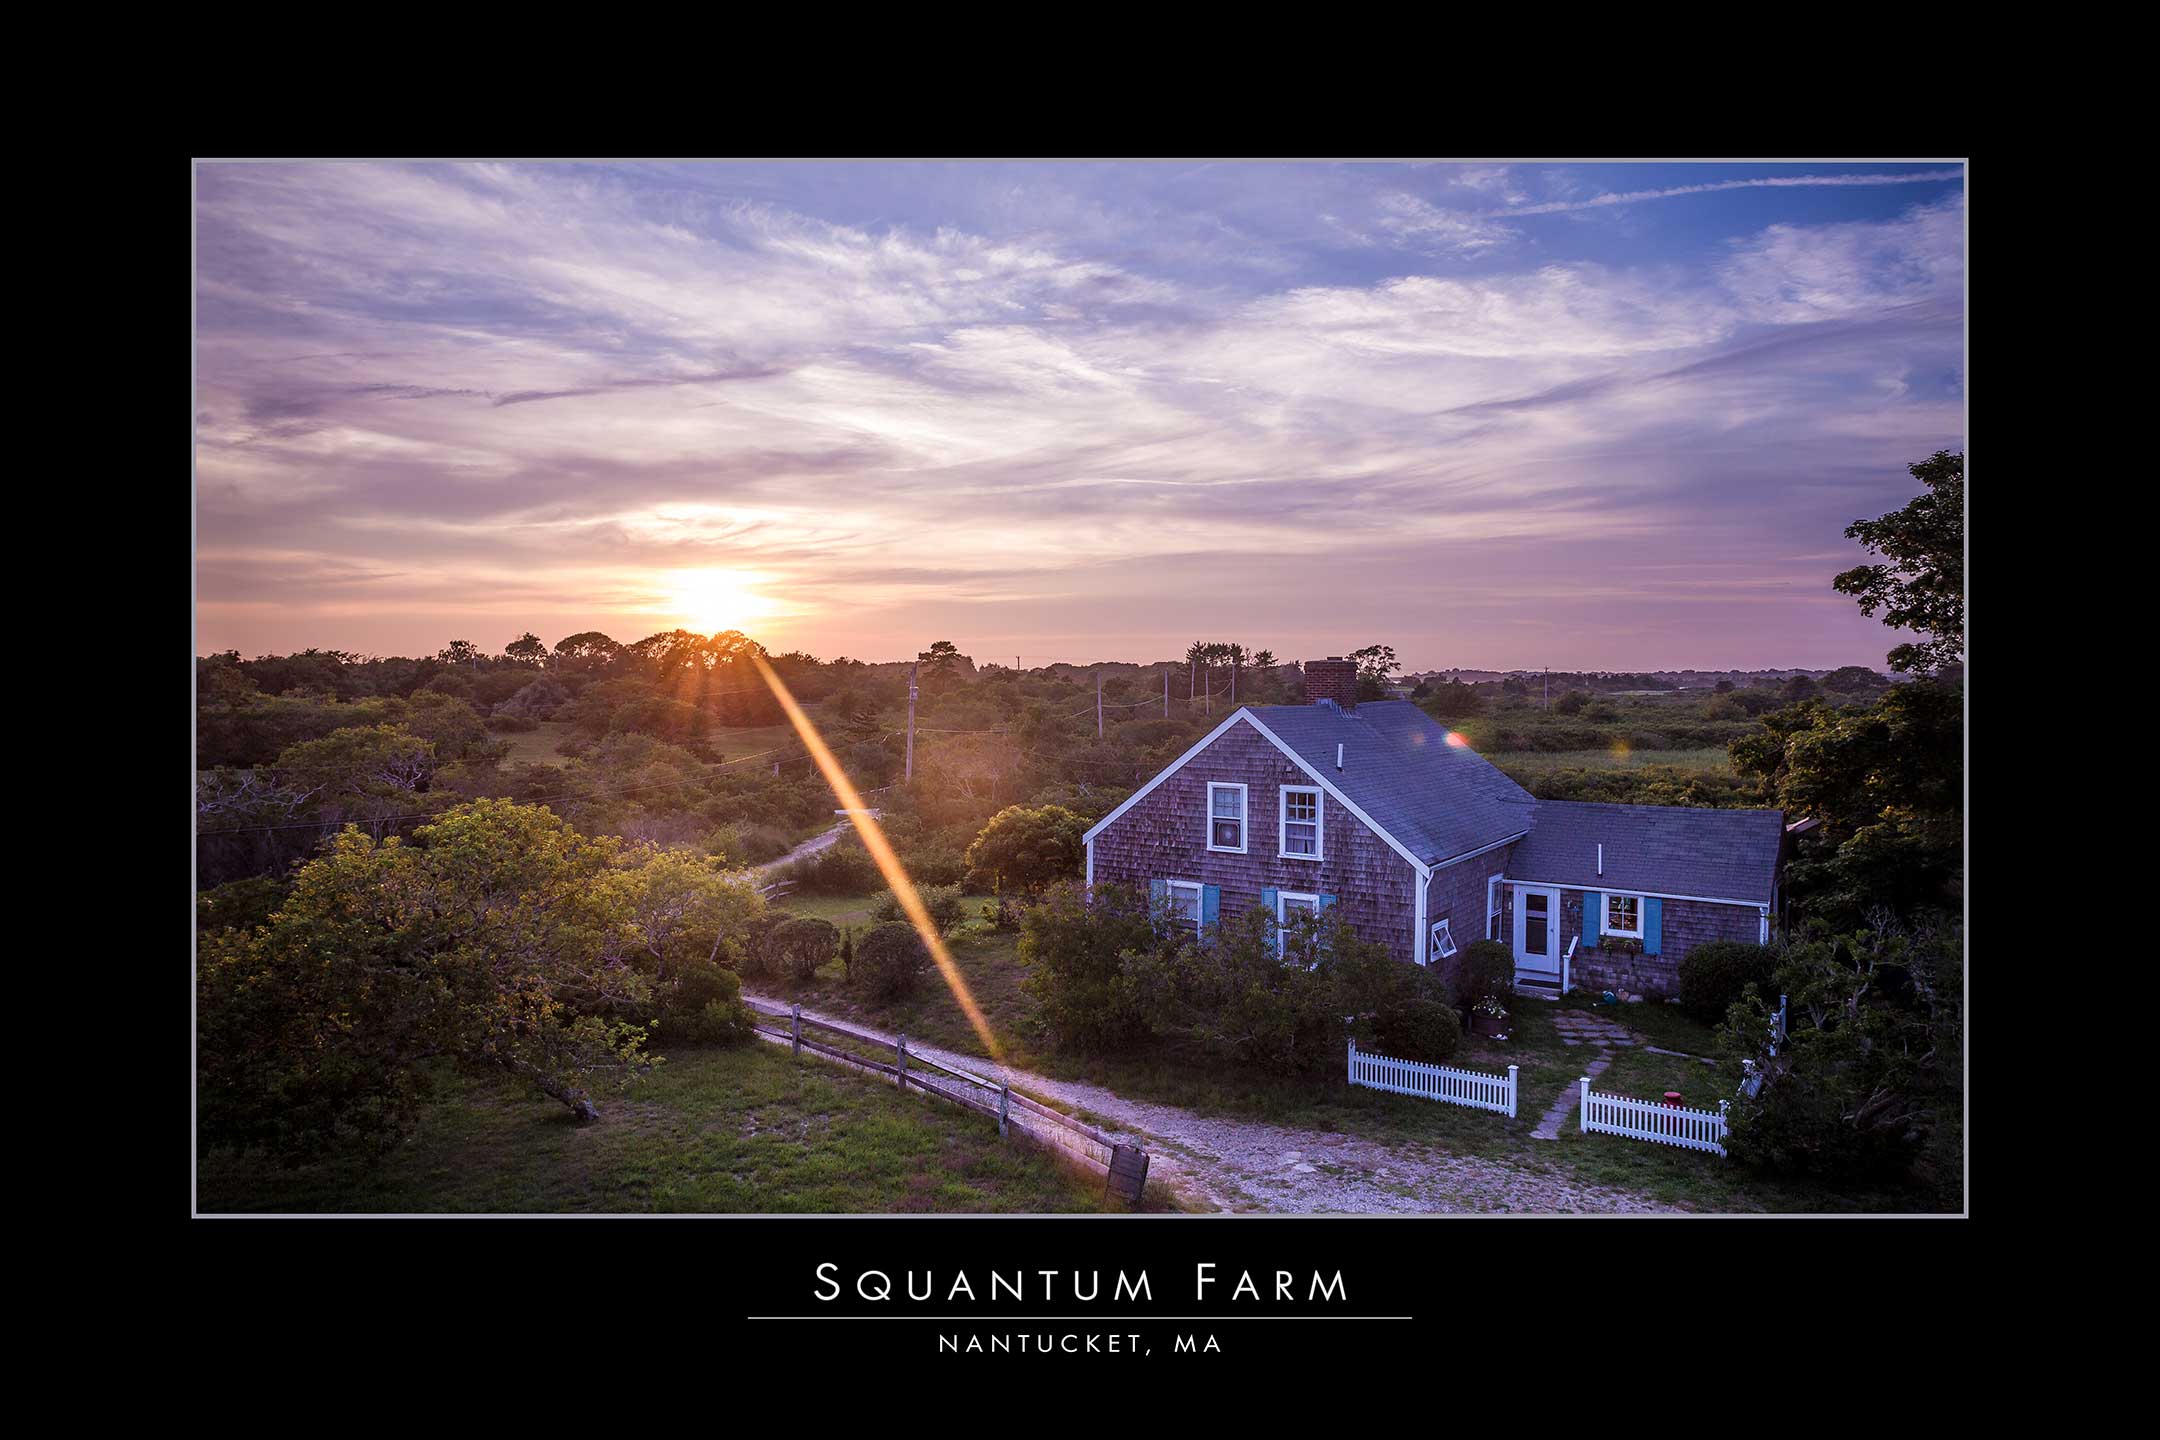 A very high resolution VAST Photo commission of sunset over the moors and a rental house on Nantucket Island in Polpis; created in Cape Cod Massachusetts by Dan Piech.